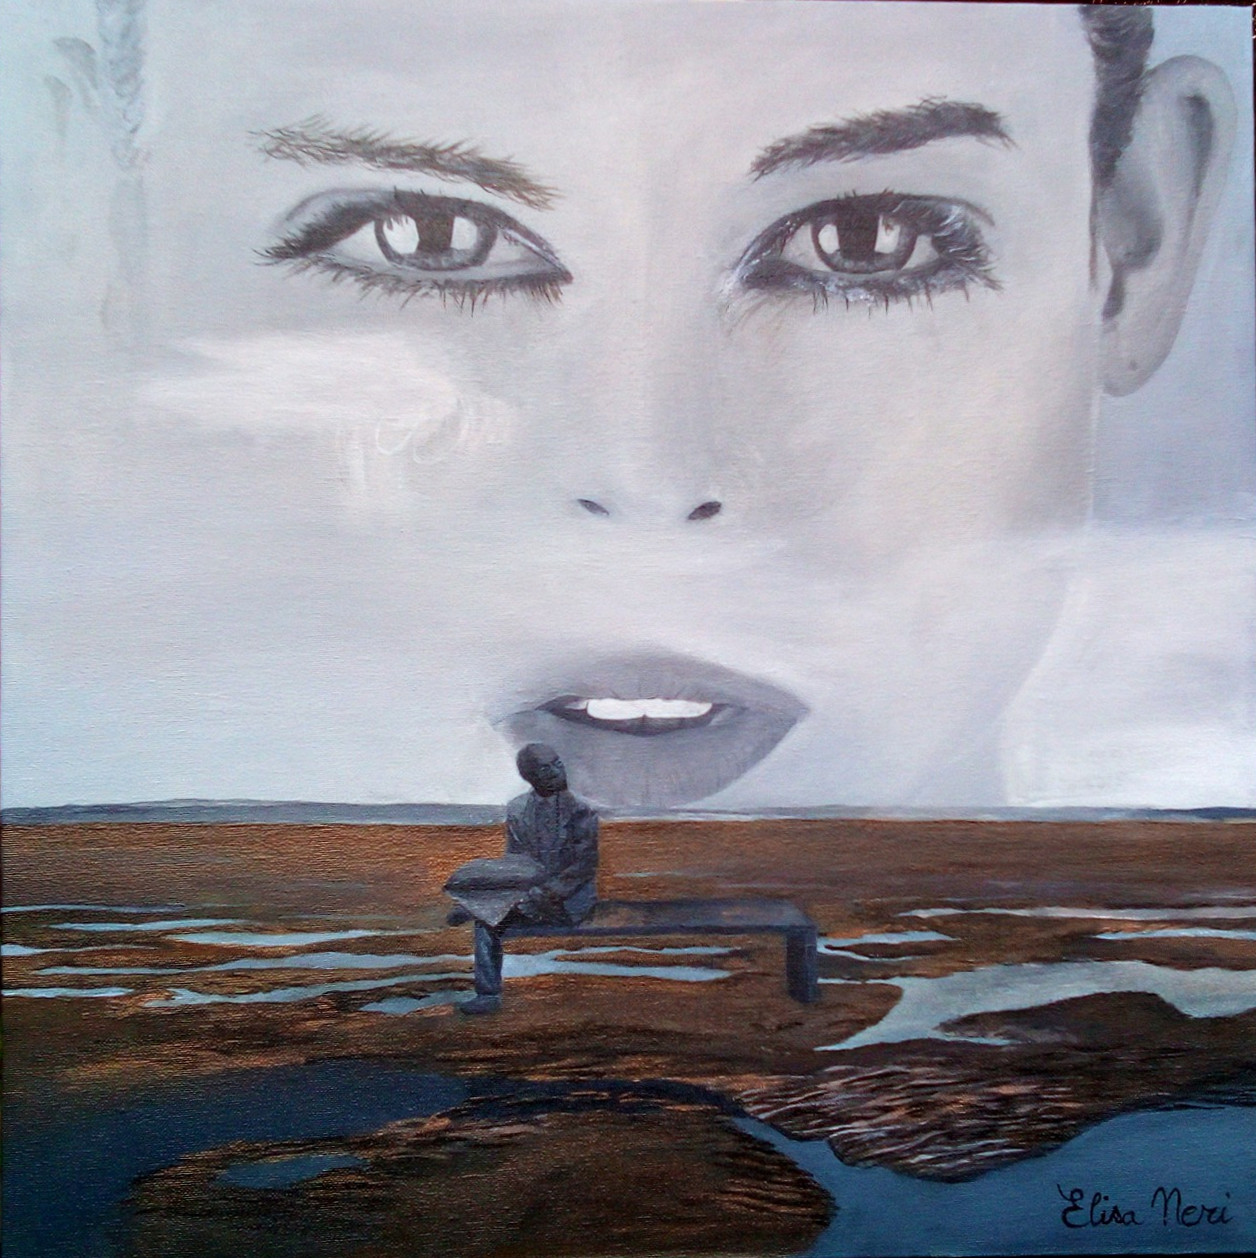 I will wait for you - painting by Elisa Neri